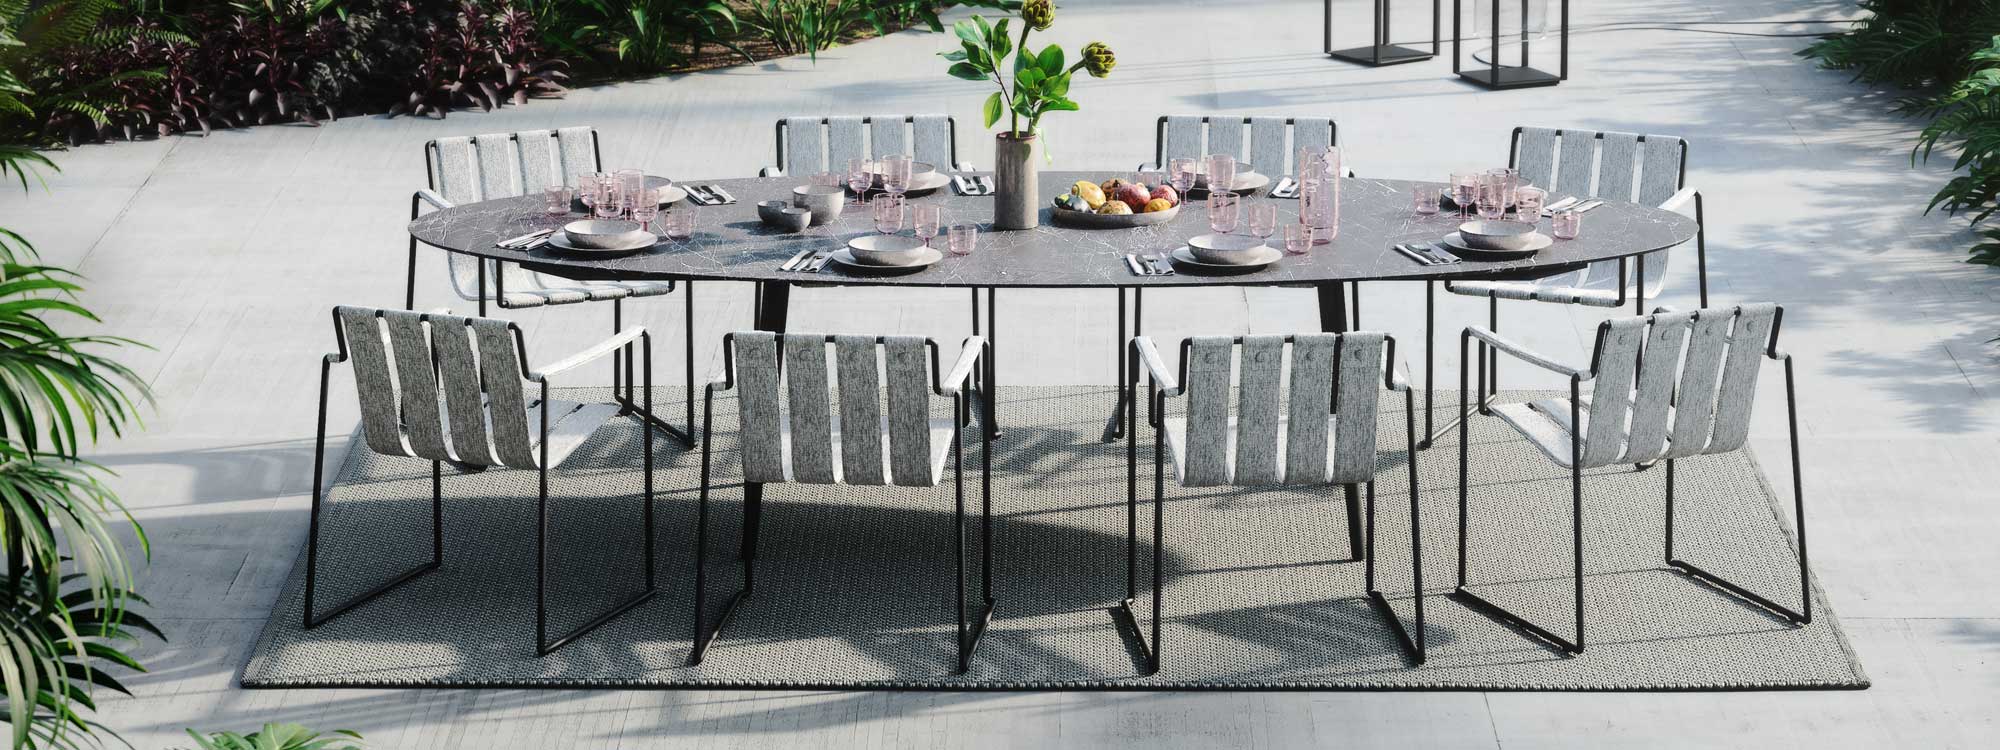 Strappy & Styletto garden dining set has an elegant outdoor table & minimalist garden chair by Royal Botania luxury outdoor dining furniture.